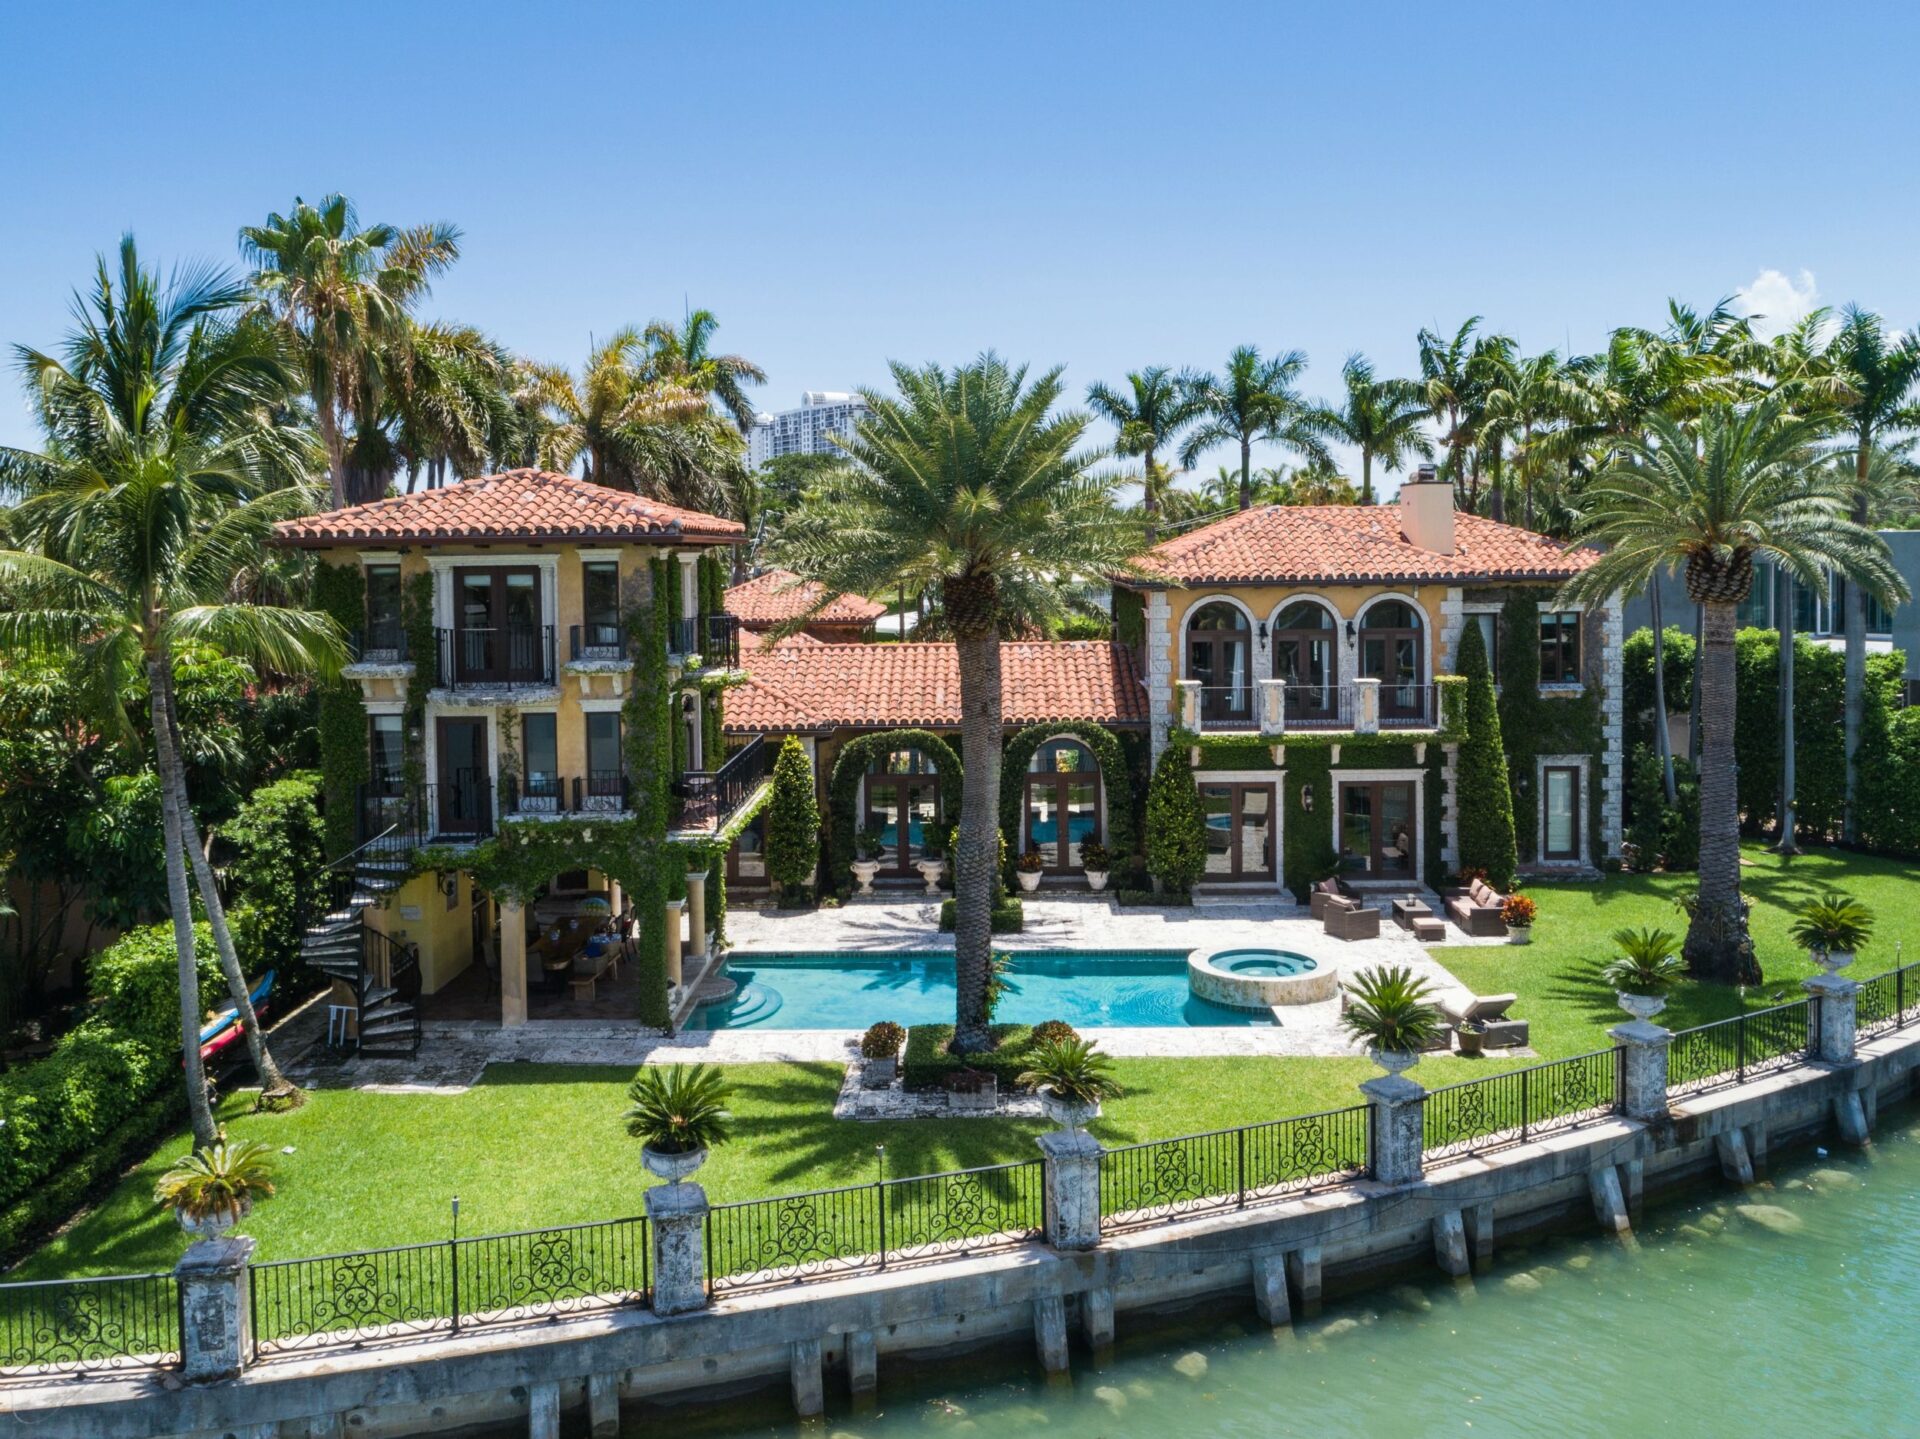 Ivy-clad Mansion in South Florida